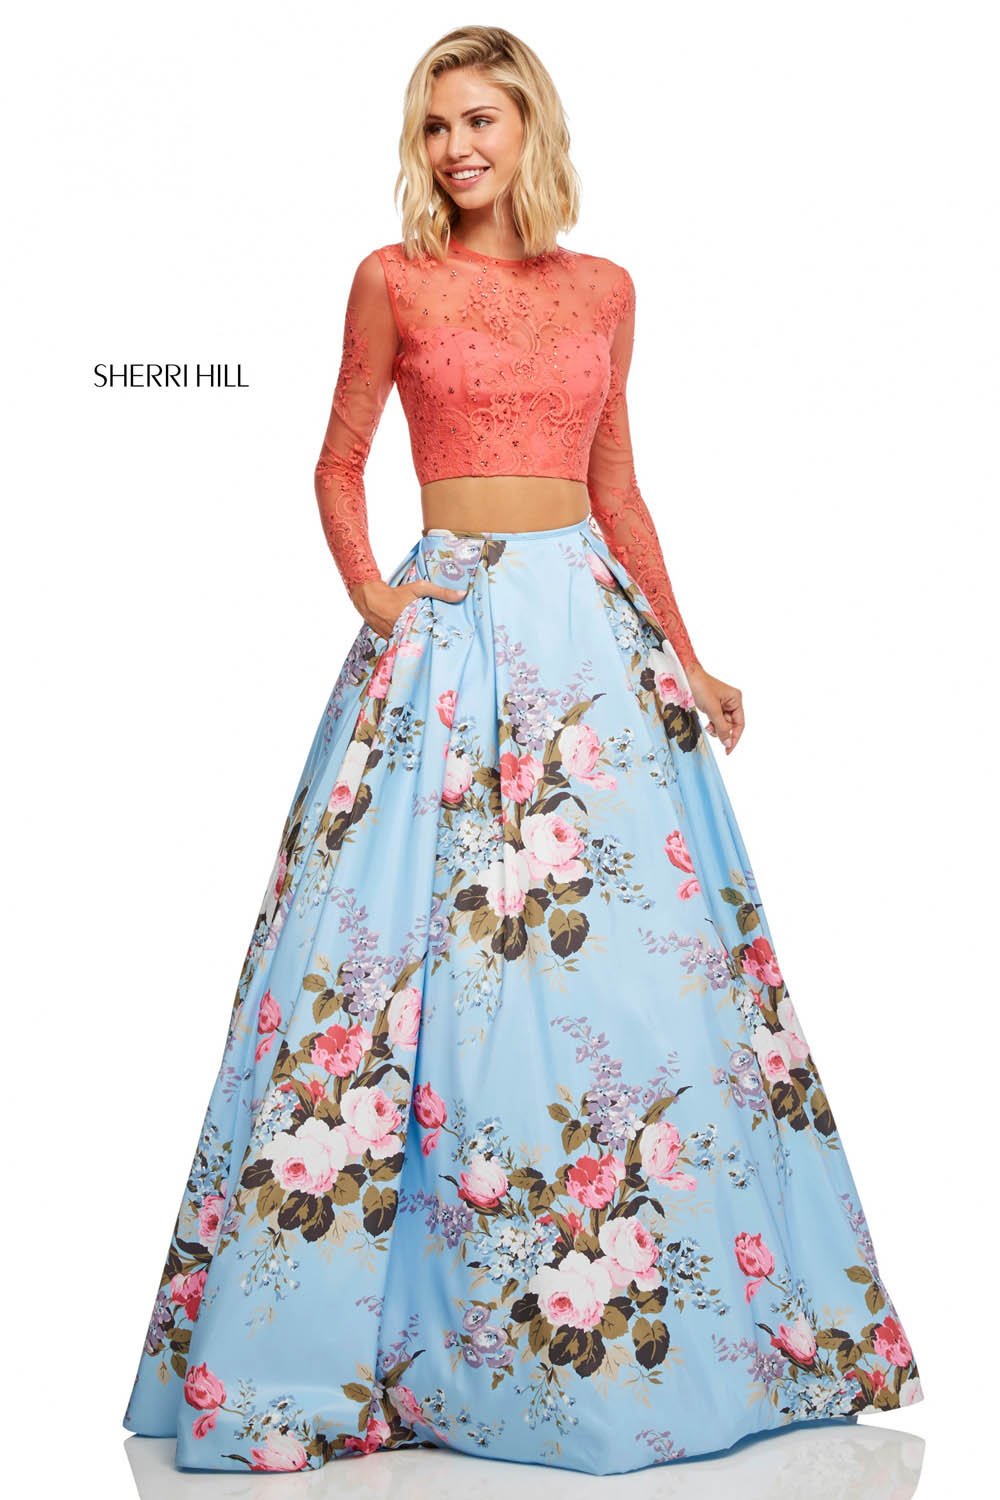 Sherri Hill 52717 dress images in these colors: Coral Blue Print, Coral Yellow Print, Coral Ivory Print.